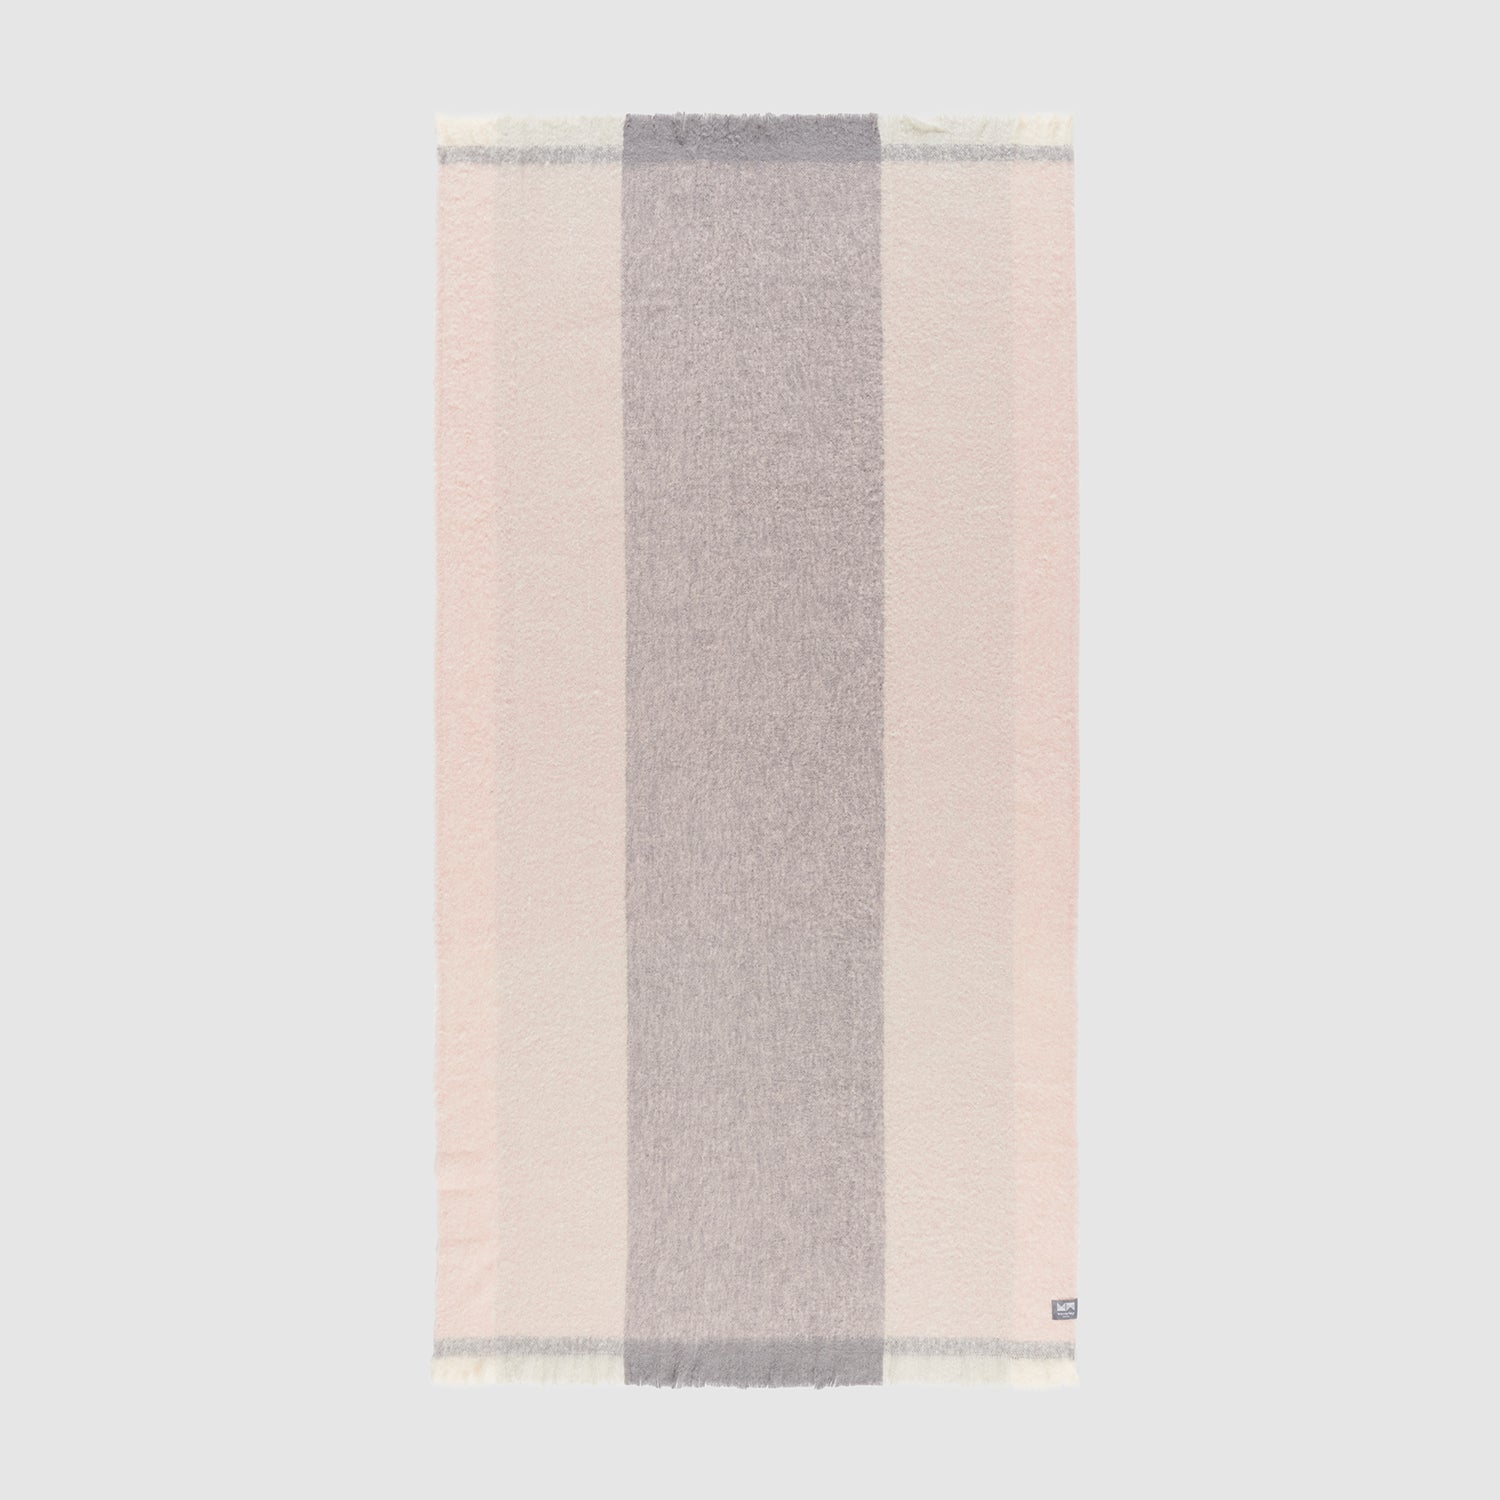 A full view of a pink ombre alpaca throw showing the striped geometric pattern.